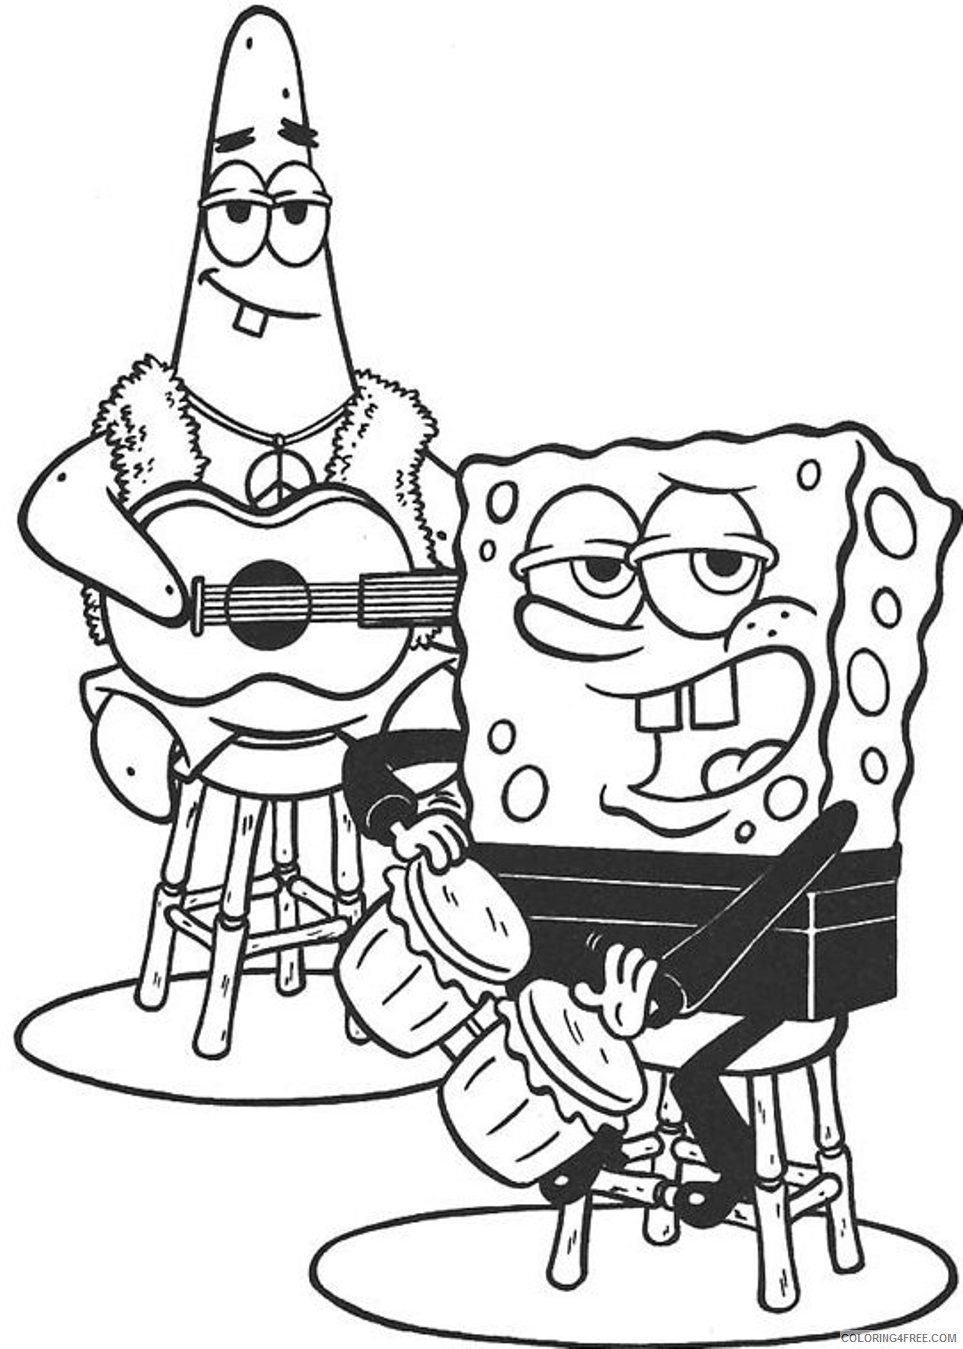 music coloring pages spongebob and patrick Coloring4free